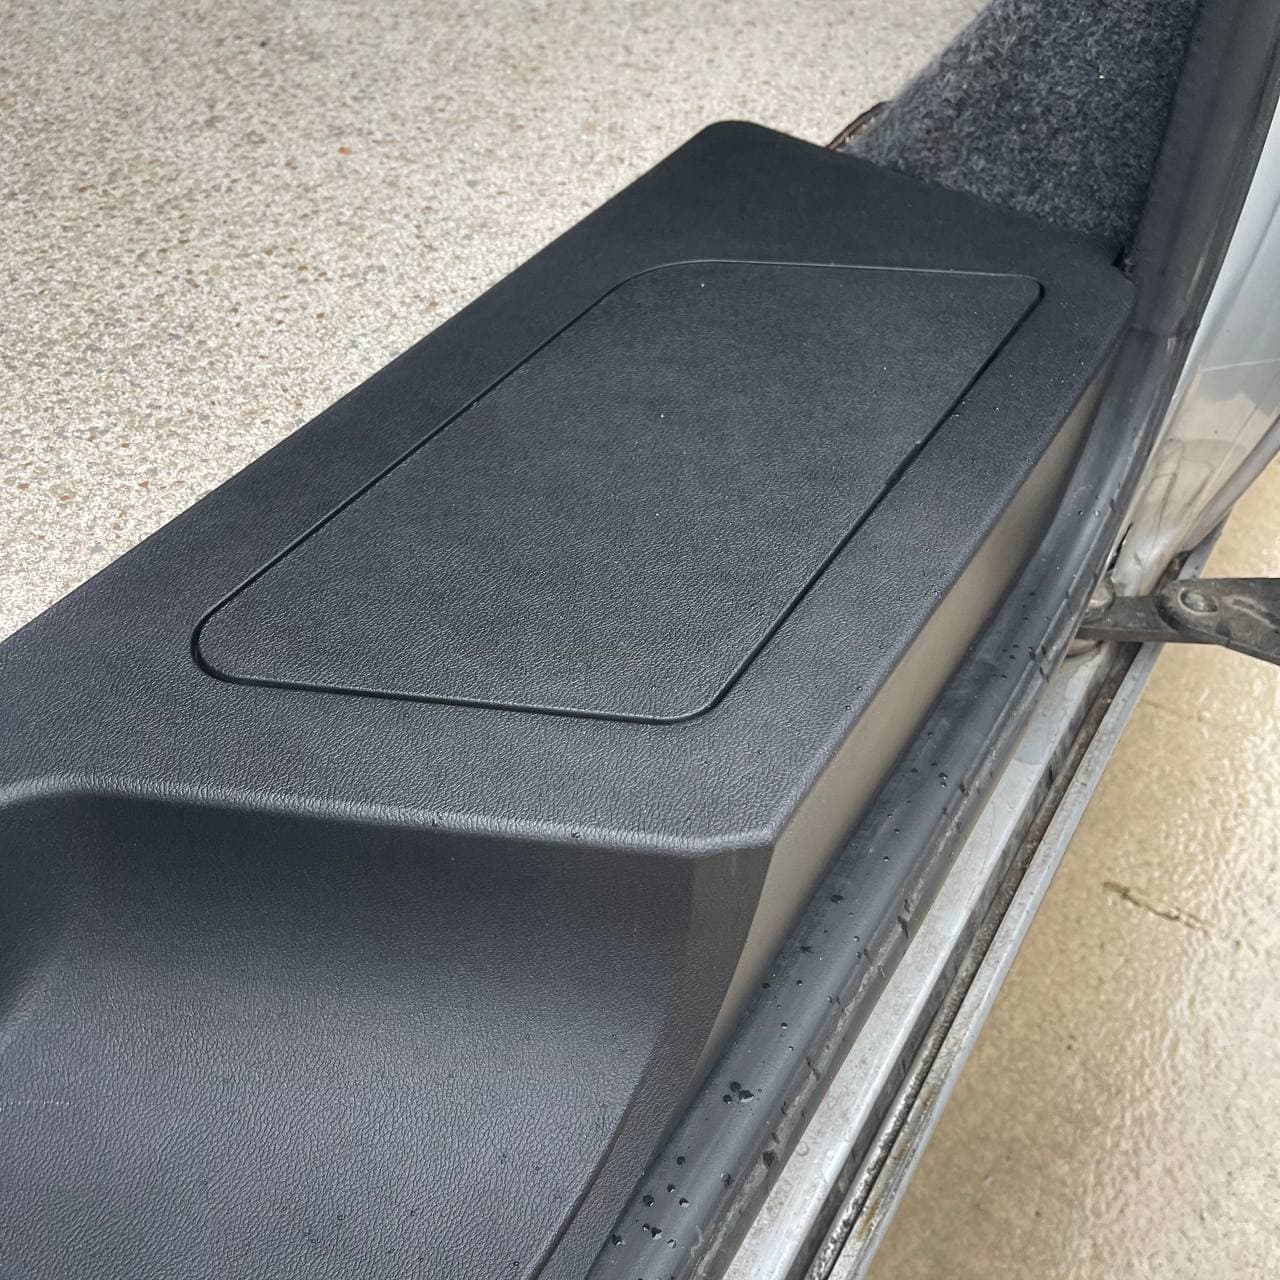 VW T6 Transporter Side Loading Door Step V3 17mm Extra Deep with Storage Compartment (B-Grade)